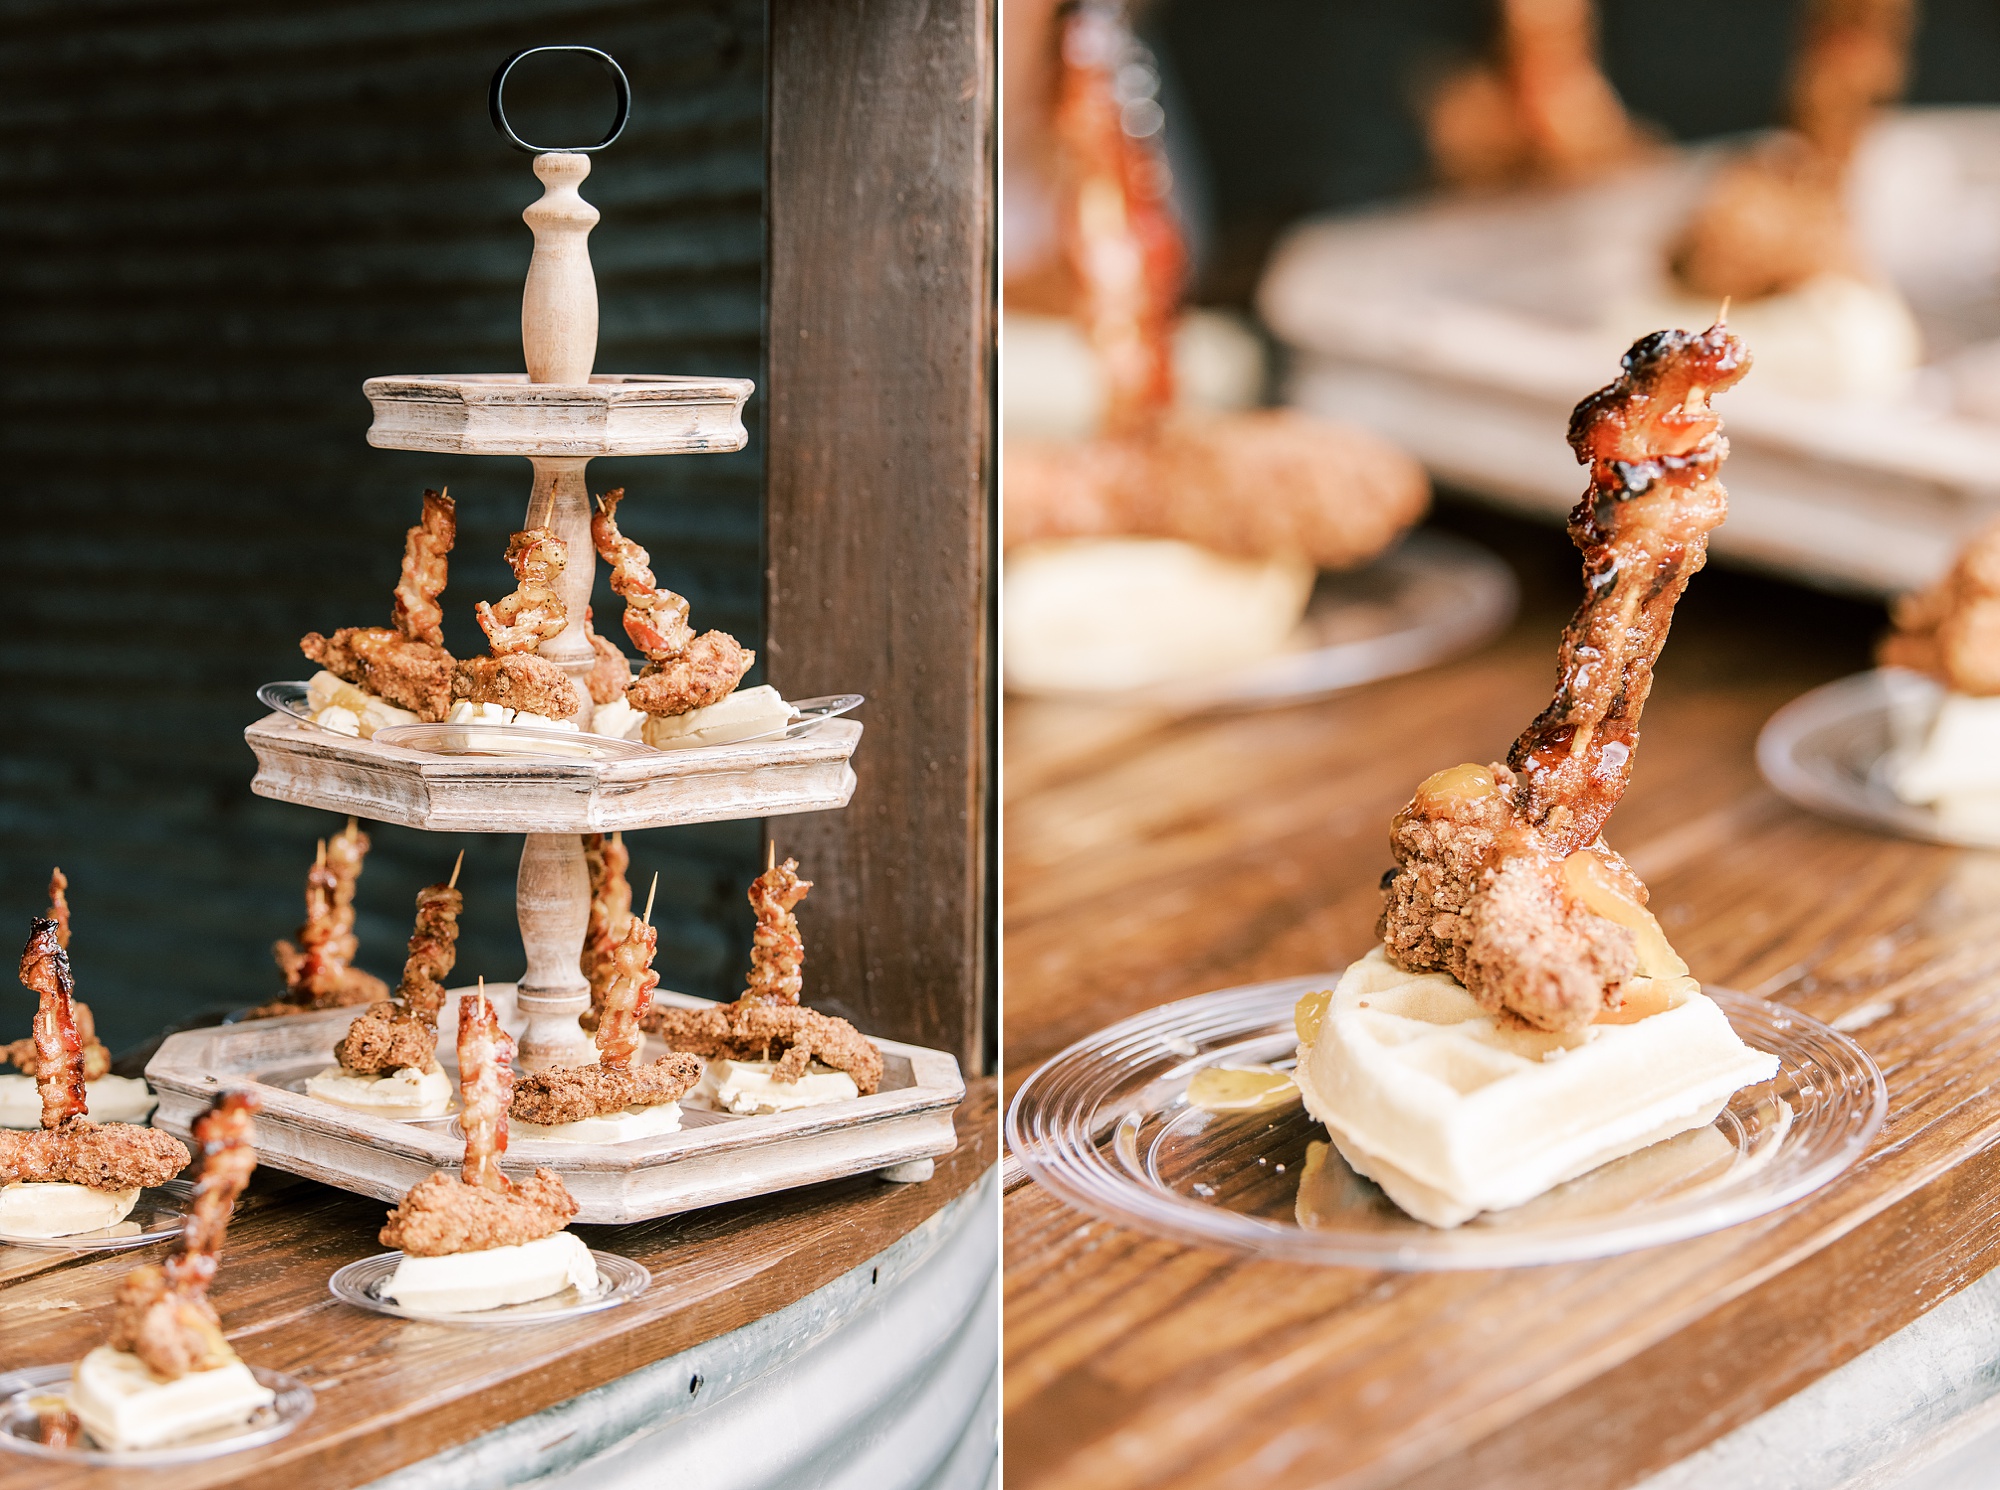 chicken and waffles for brunch inspired wedding reception